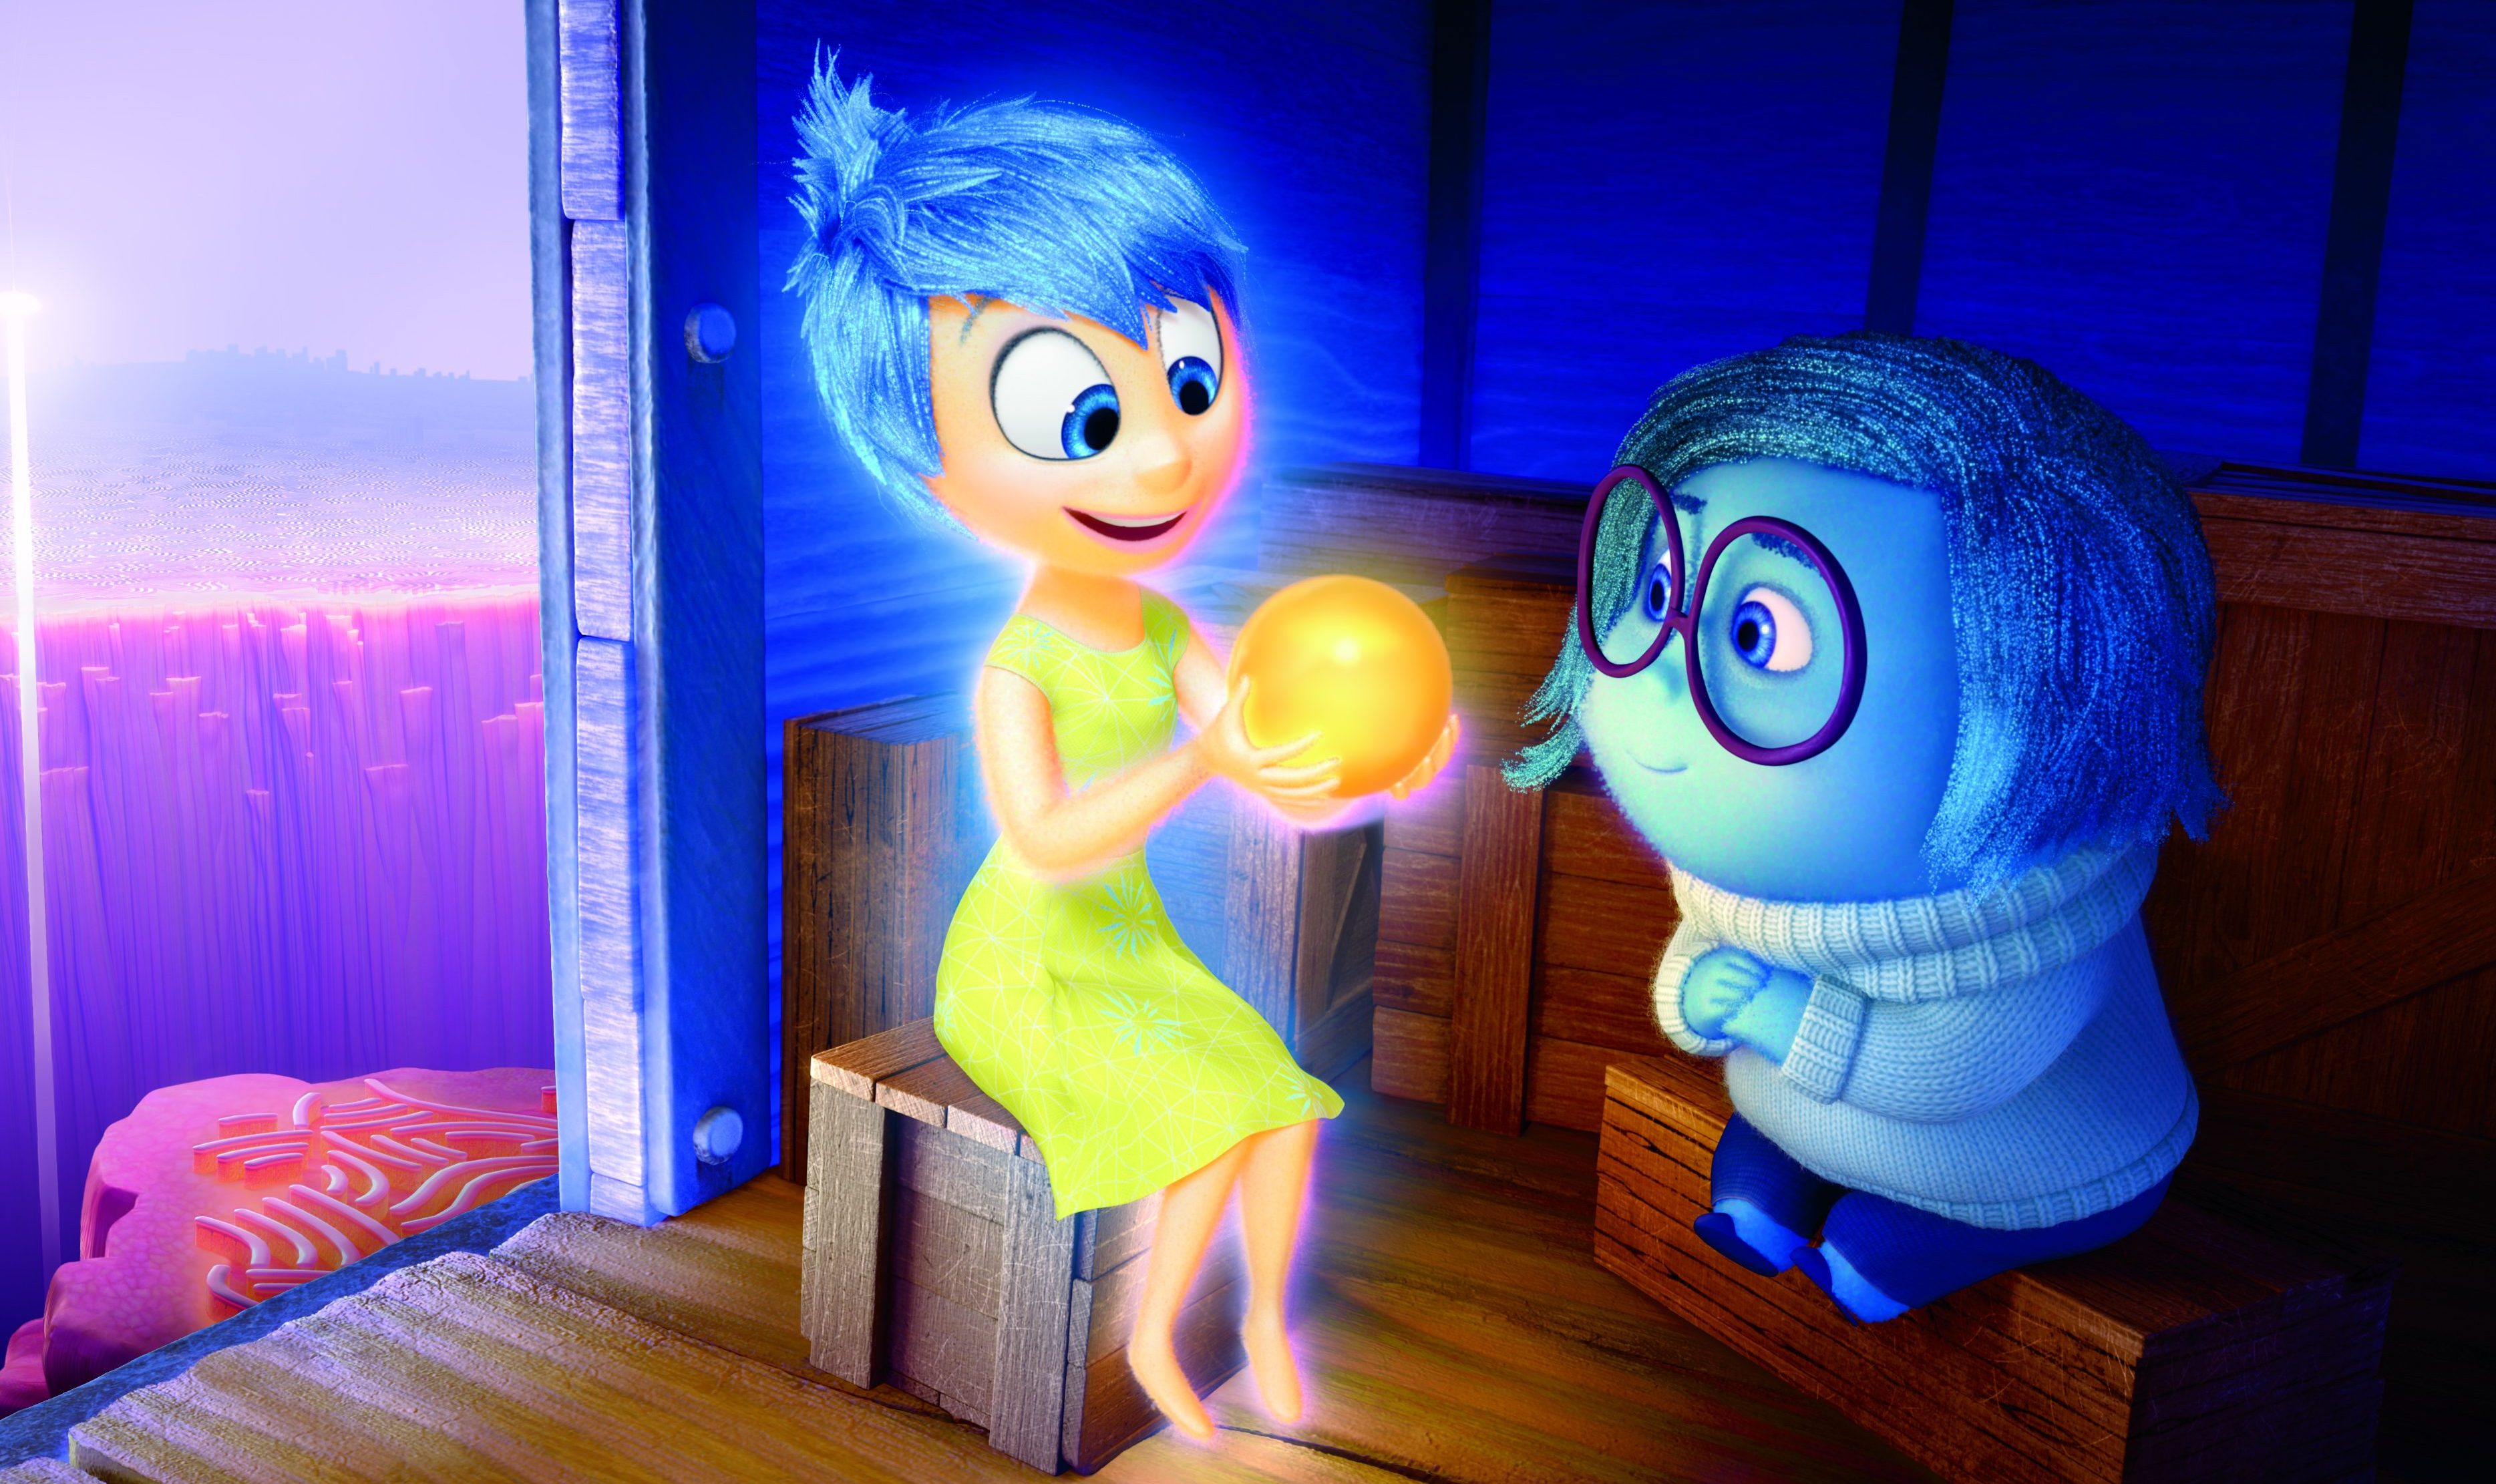 Joy (voice of Amy Poehler) and Sadness (voice of Phyllis Smith) catch a ride on the Train of Thought in Disney•Pixar's "Inside Out." Directed by Pete Docter (“Monsters, Inc.,” “Up”), "Inside Out" opens in theaters nationwide June 19, 2015. ©2014 Disney•Pixar. All Rights Reserved.